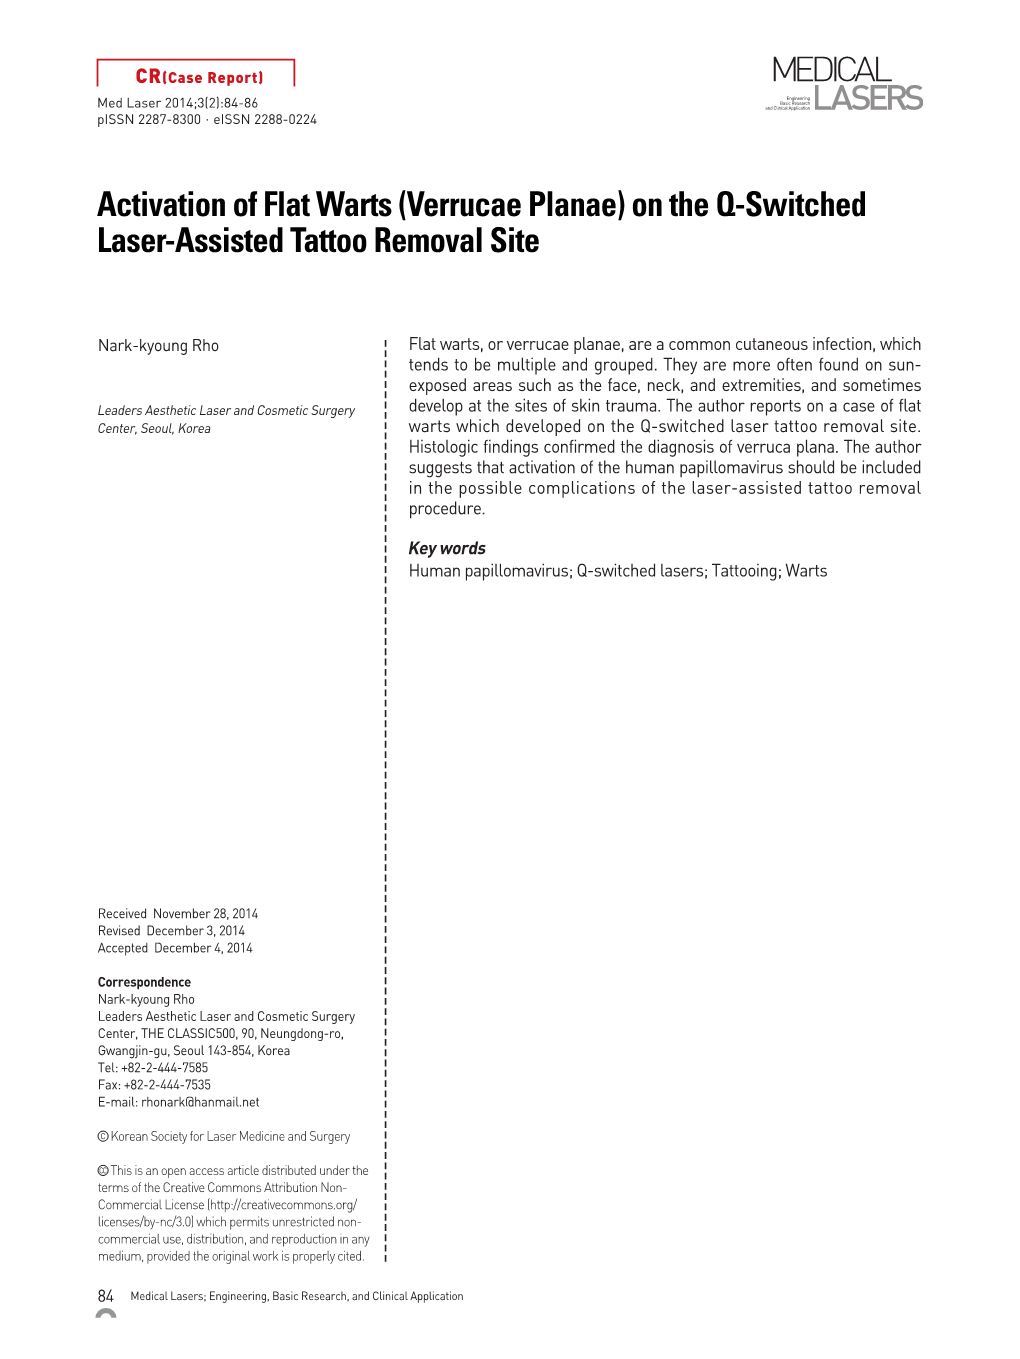 Activation of Flat Warts (Verrucae Planae) on the Q-Switched Laser-Assisted Tattoo Removal Site